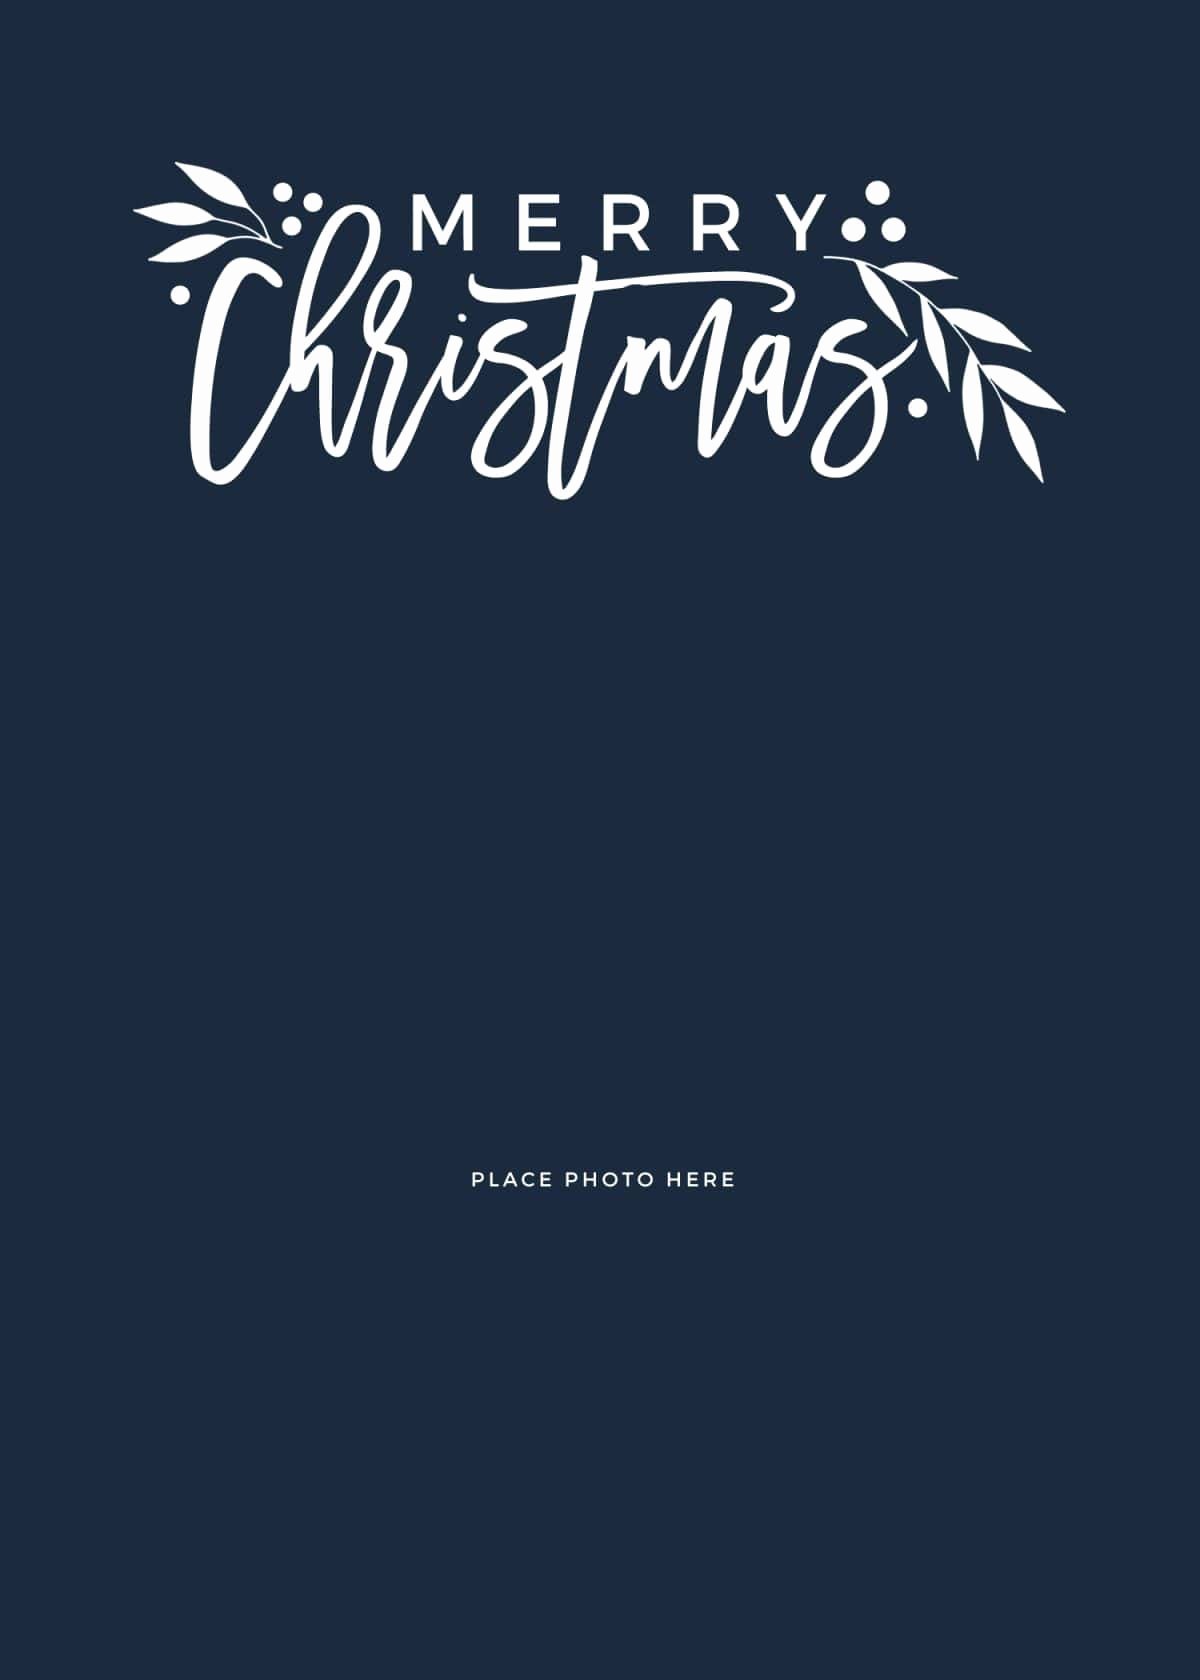 Make Your Own Christmas Cards for Free somewhat